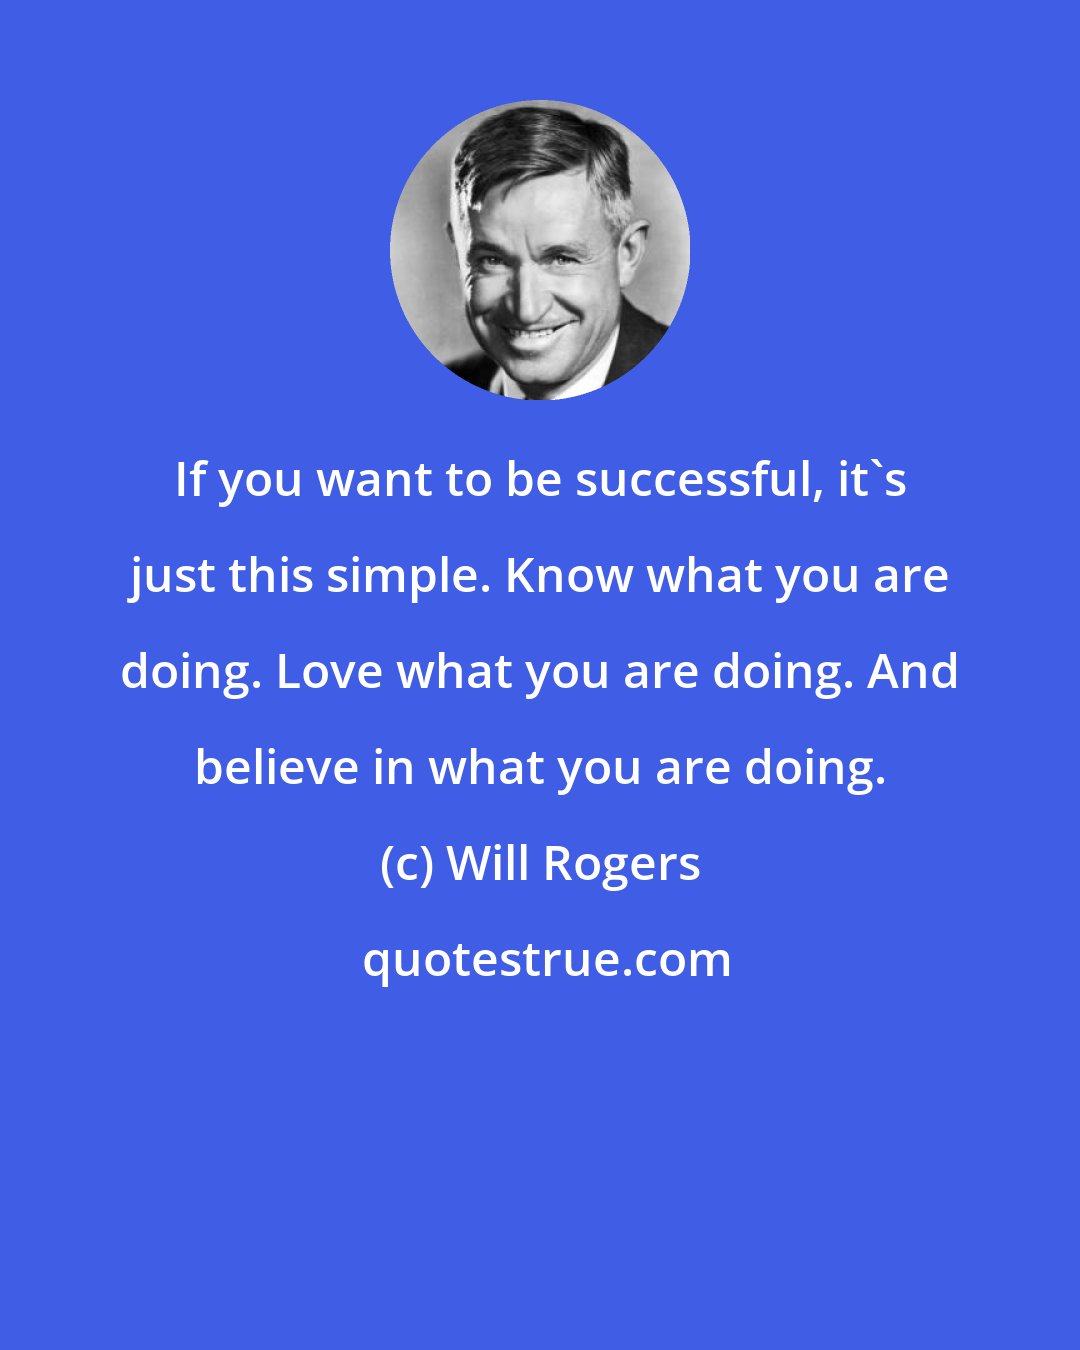 Will Rogers: If you want to be successful, it's just this simple. Know what you are doing. Love what you are doing. And believe in what you are doing.